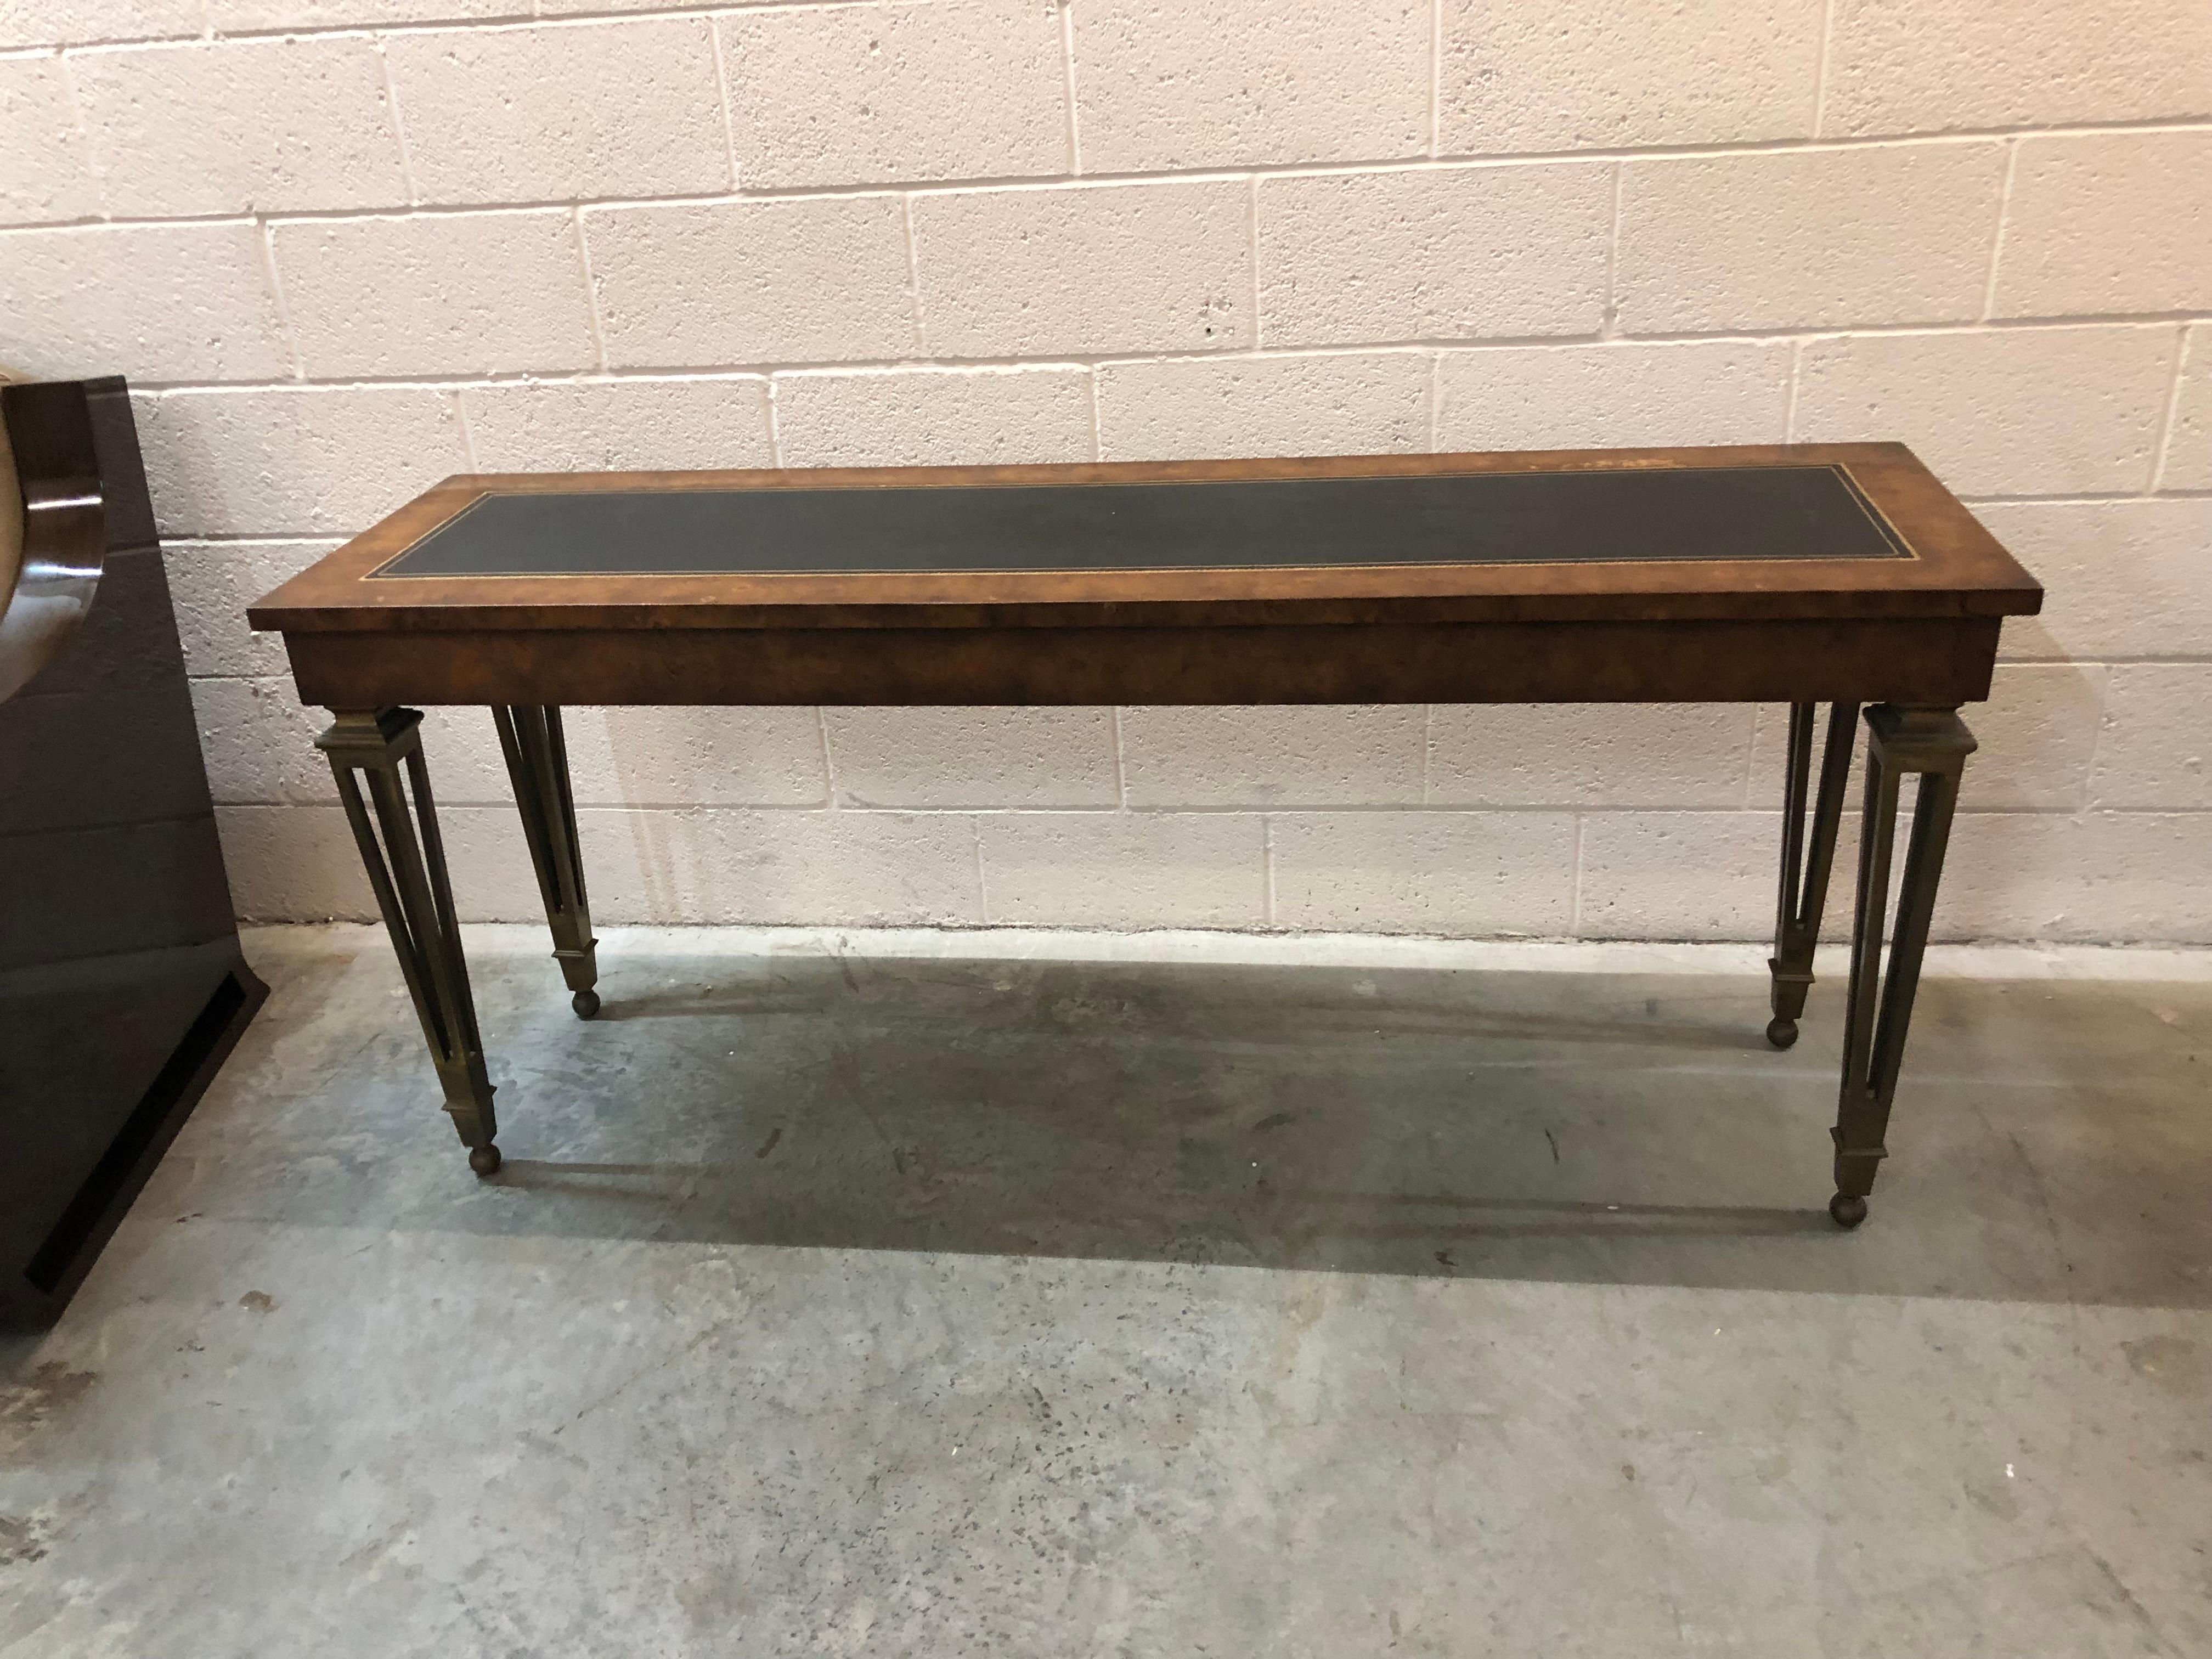 Year: 1950
Country: French
Wood, bronze and leather
It is an elegant and sophisticated console.
You want to live in the golden years, this is the console that your project needs.
We have specialized in the sale of Art Deco and Art Nouveau styles